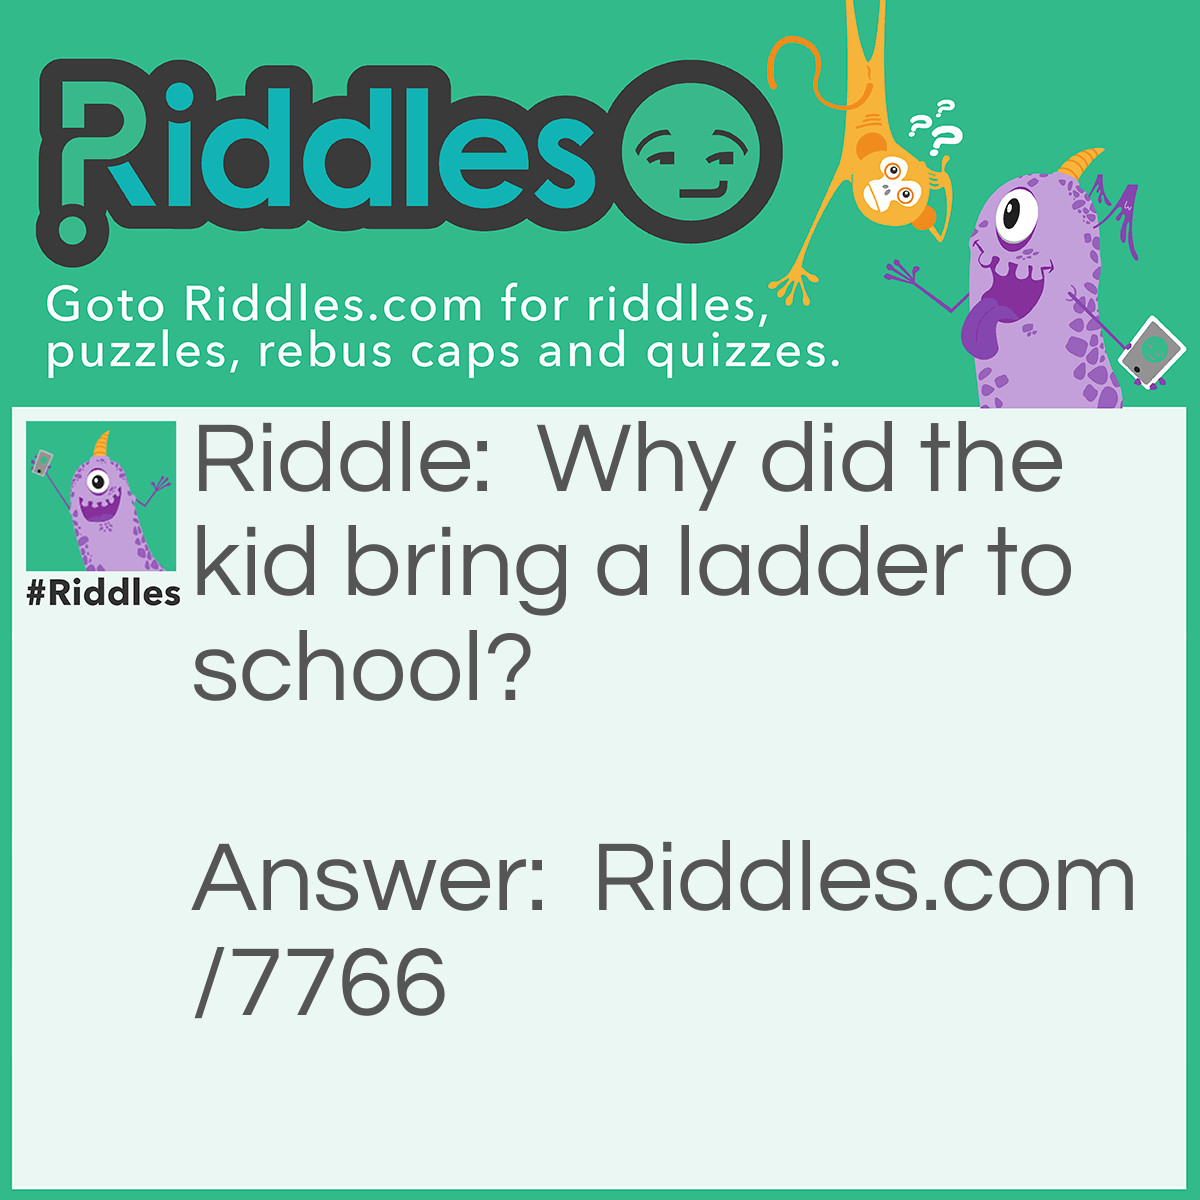 Riddle: Why did the kid bring a ladder to school? Answer: Because he wants to go to High school